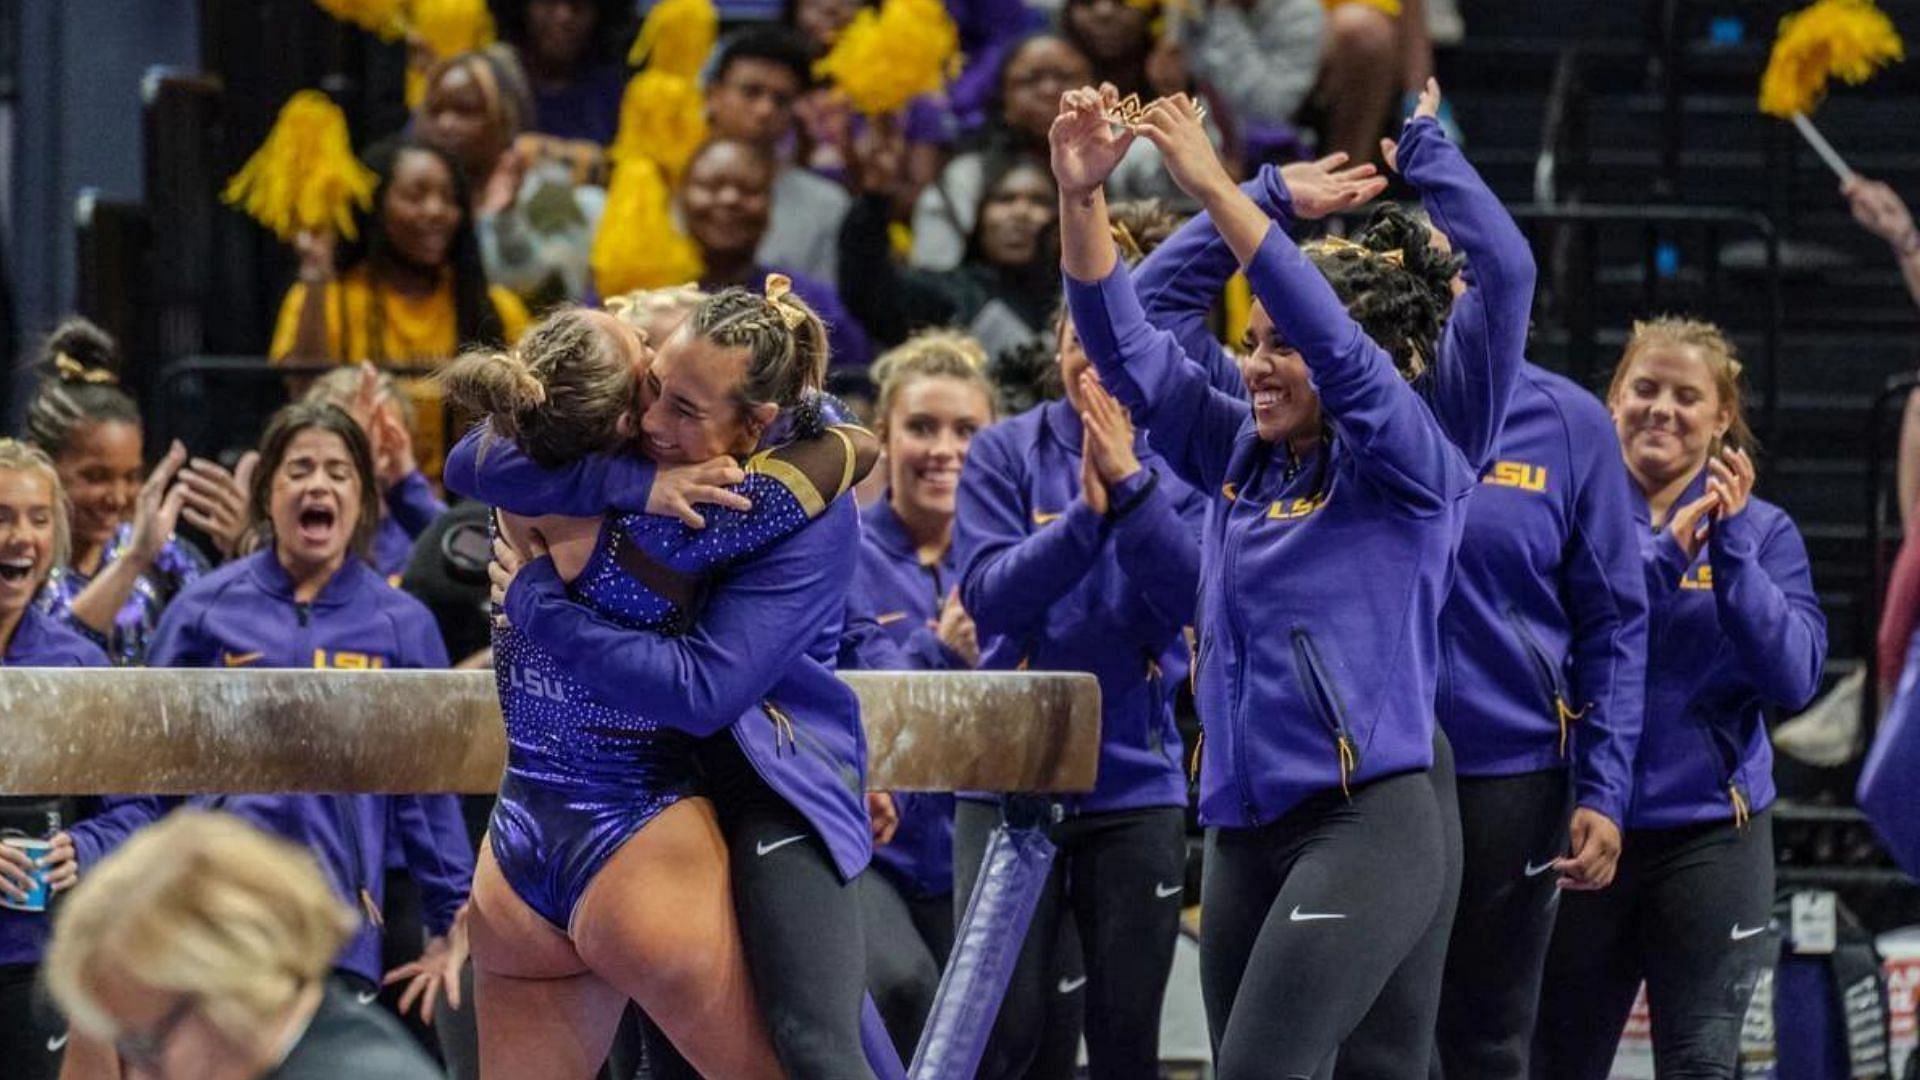 LSU logged their first victory of the season against Ohio.